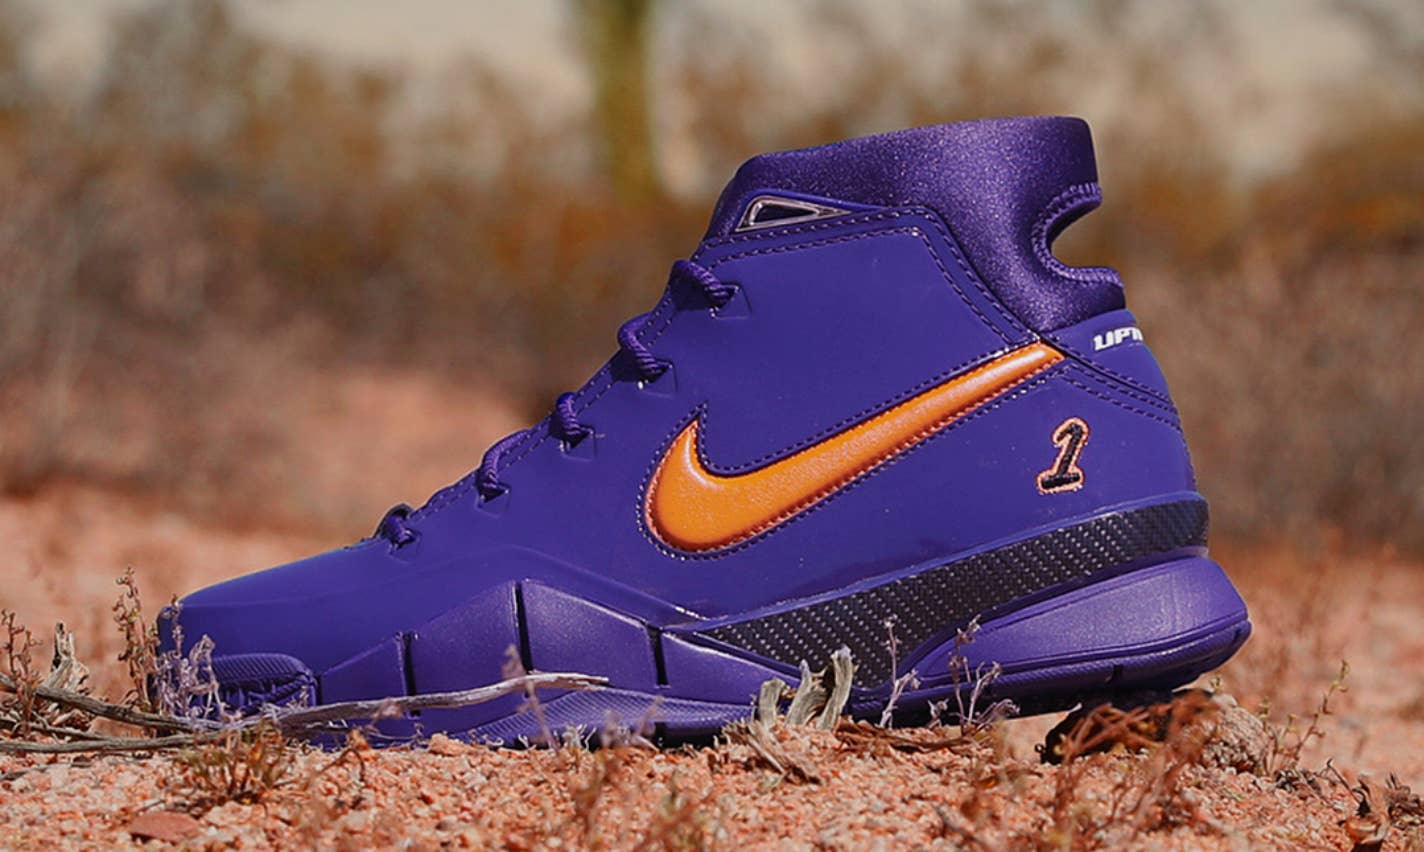 What Pros Wear: Devin Booker's Nike Kobe 5 Protro Shoes - What